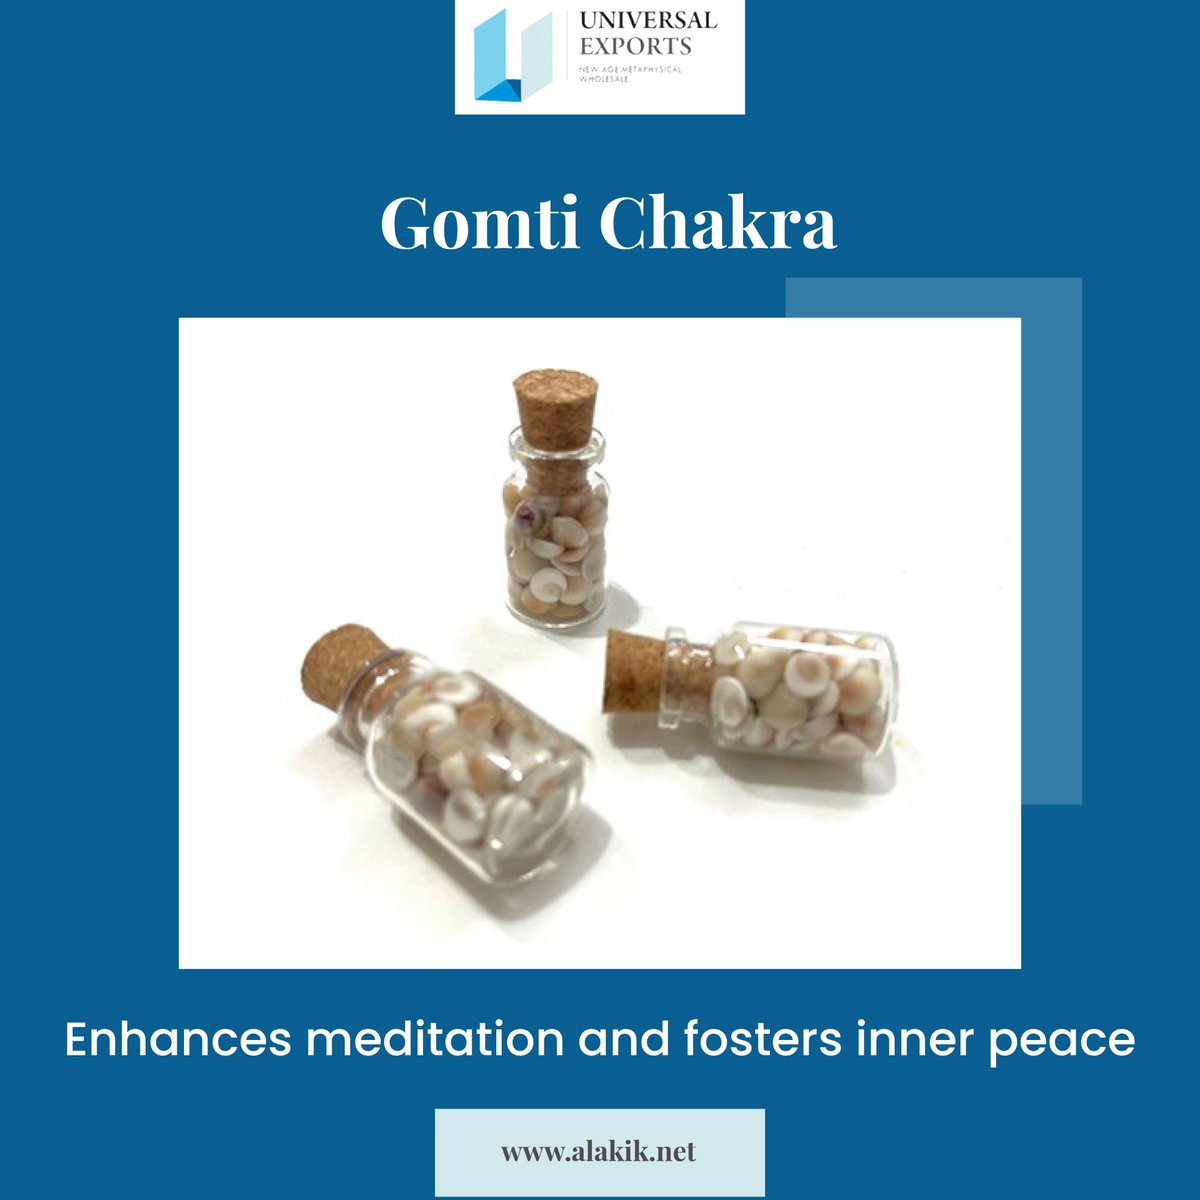 Gomti Chakra serves as a powerful aid for meditation, enhancing the practice and fostering inner peace.

For more information: shorturl.at/nuVZ1

#Gomtichakra #Chakrahealing #Chakrafillbottles #Healingproducts #Meditating #deeperconnection #spiritualrealm #Alakik